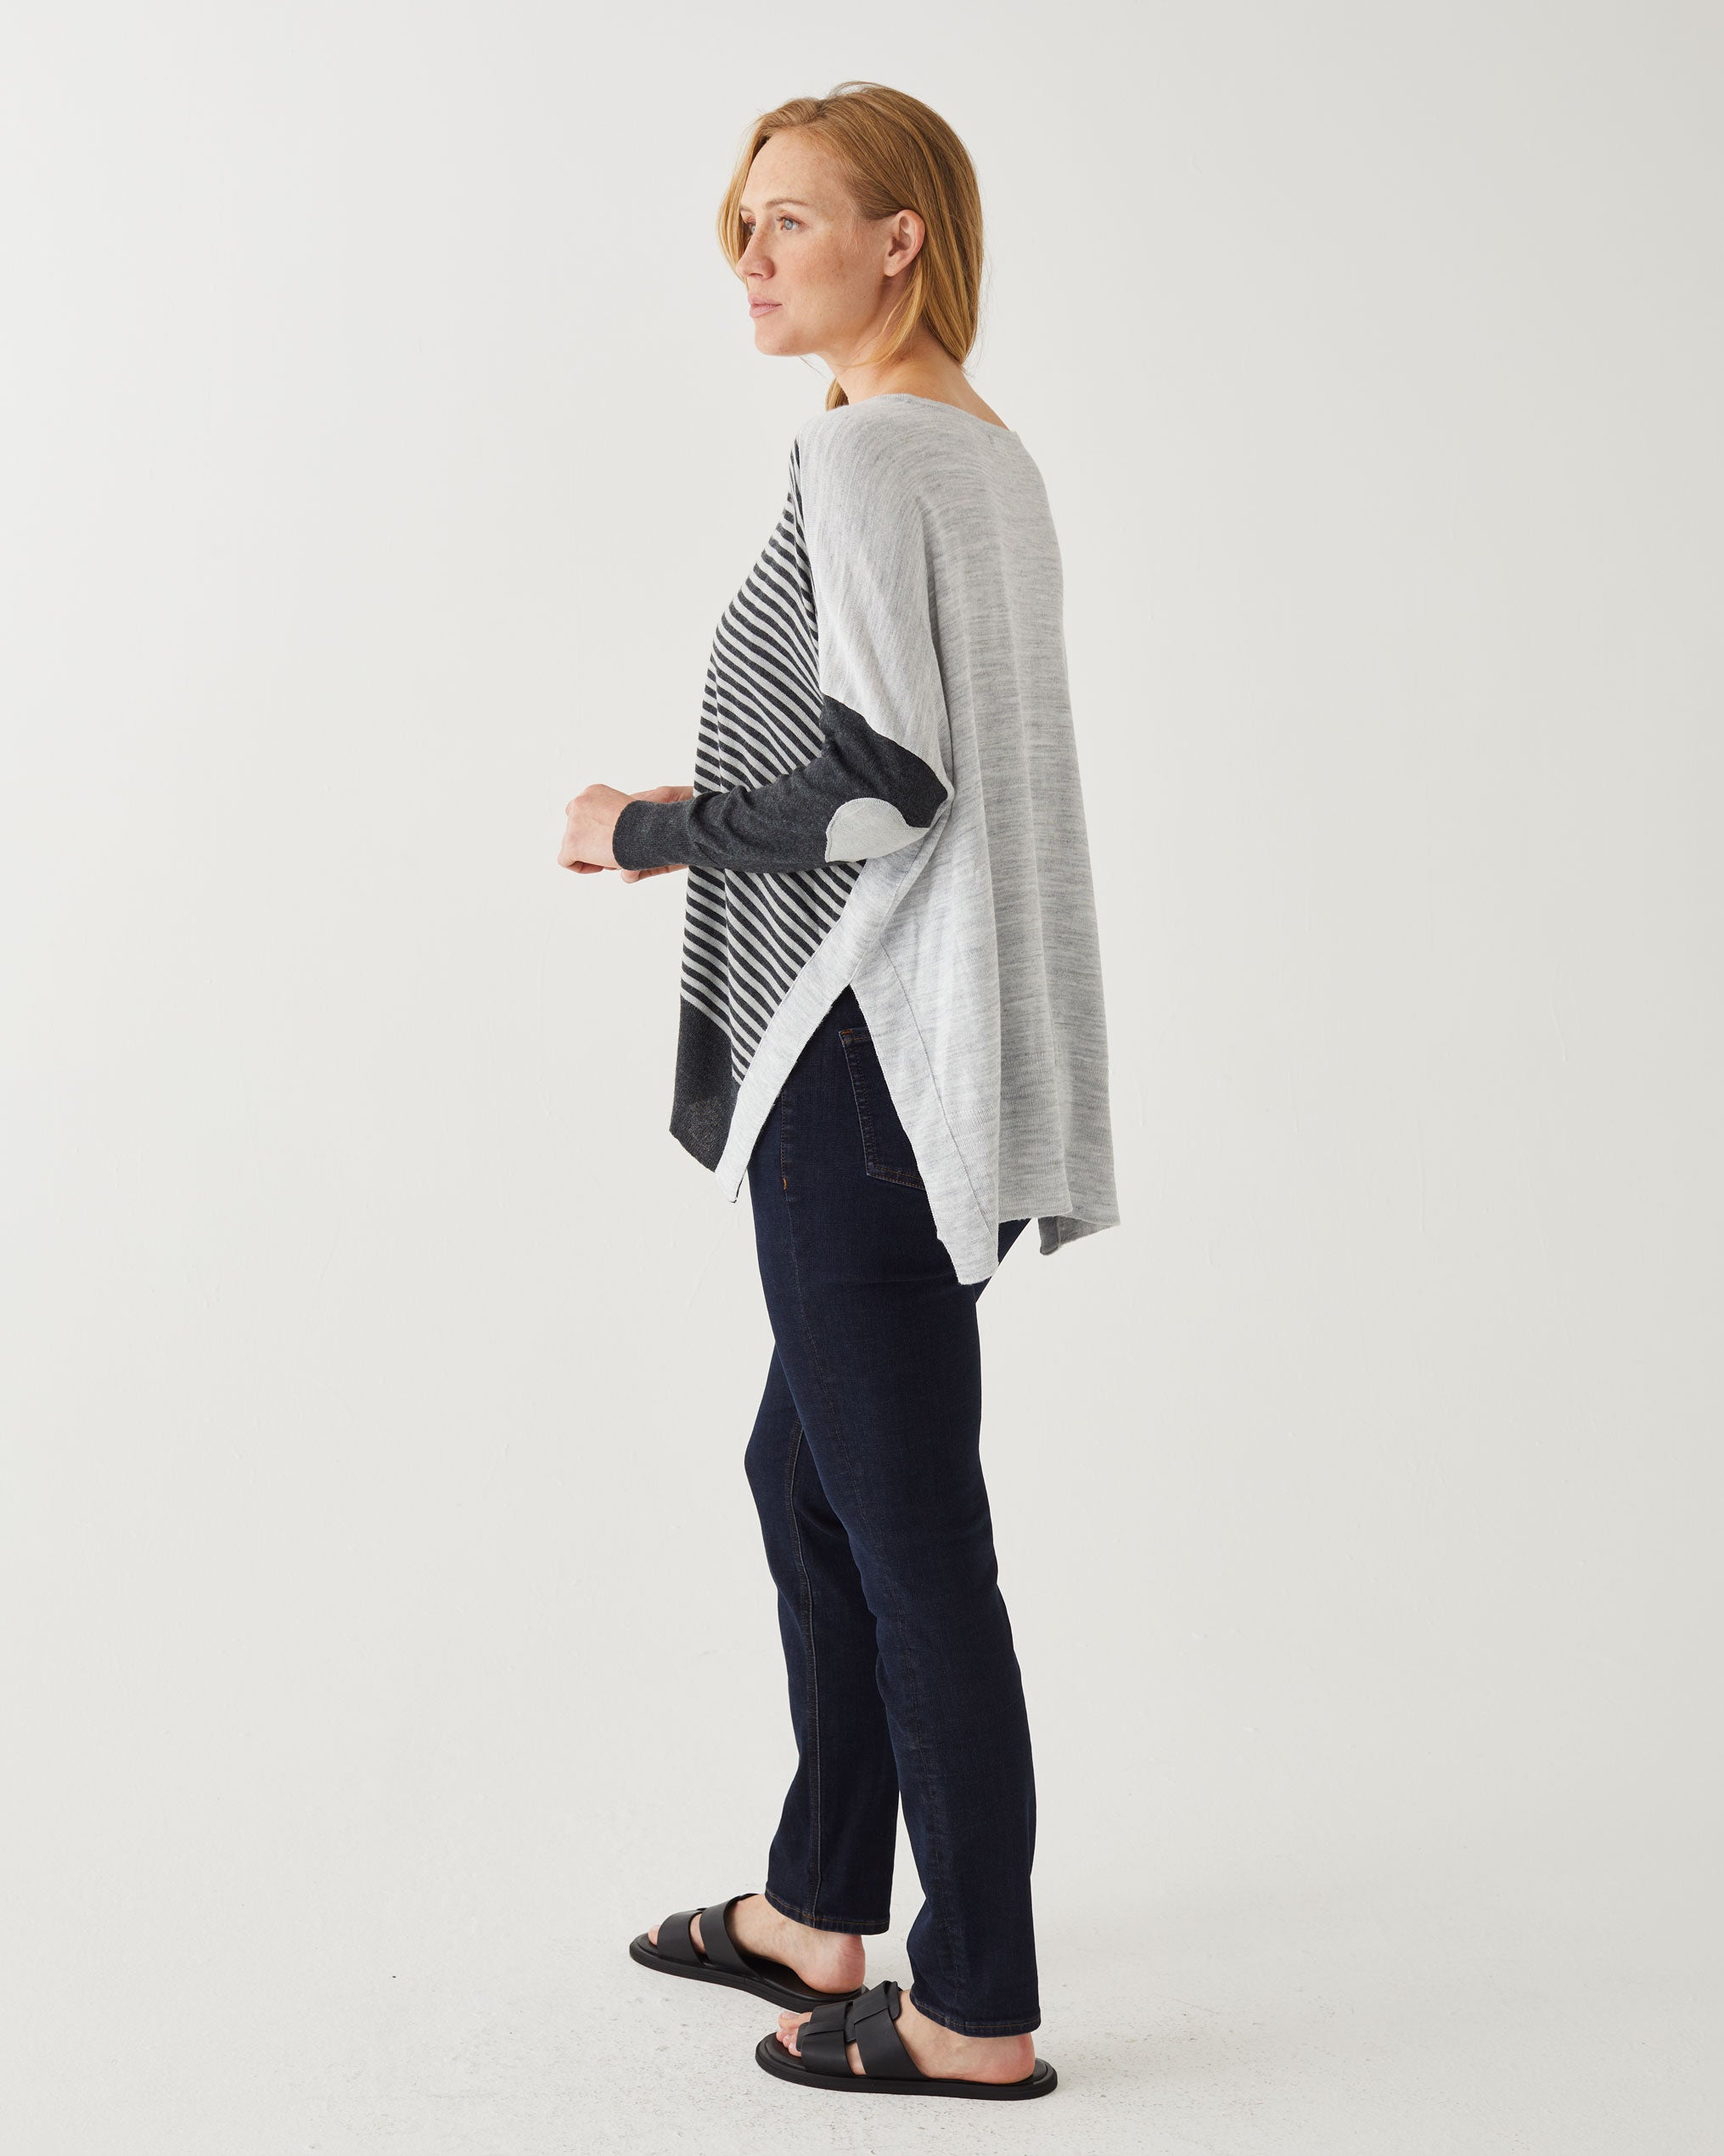 profile of woman wearing Amour Sweater in grey stripes with grey heart elbow patch